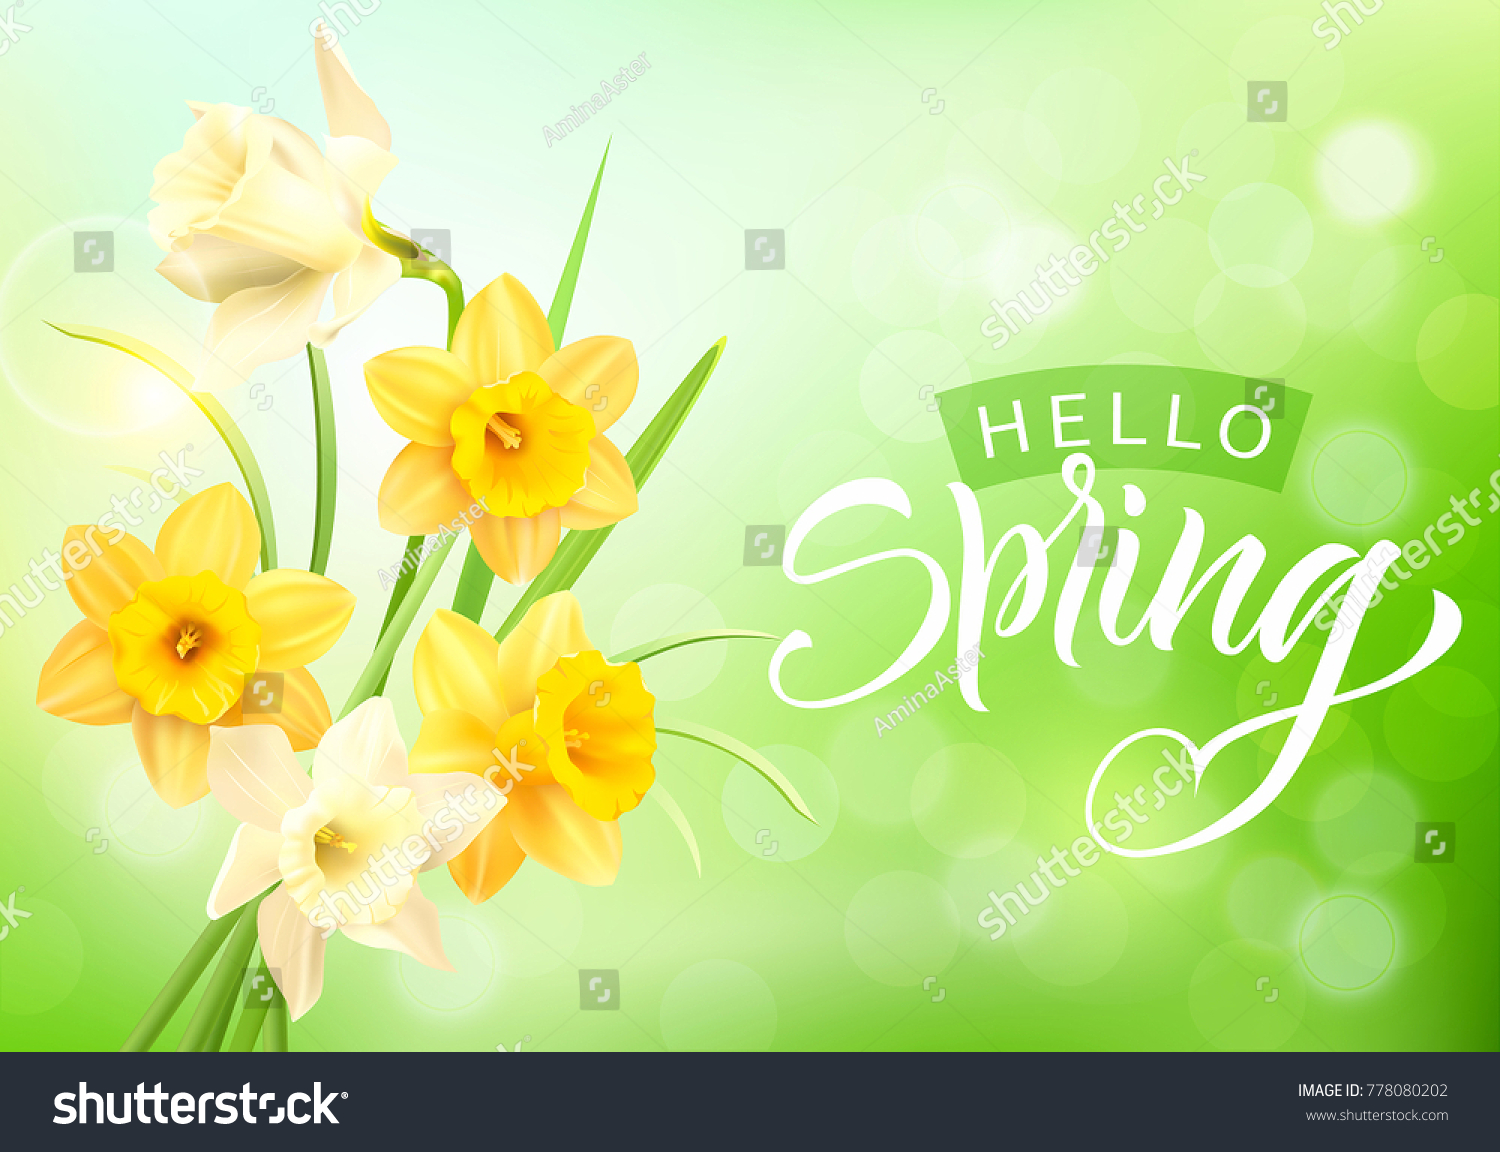 SVG of Romantic background with daffodils bouquet and spring greeting. Vector illustration. svg